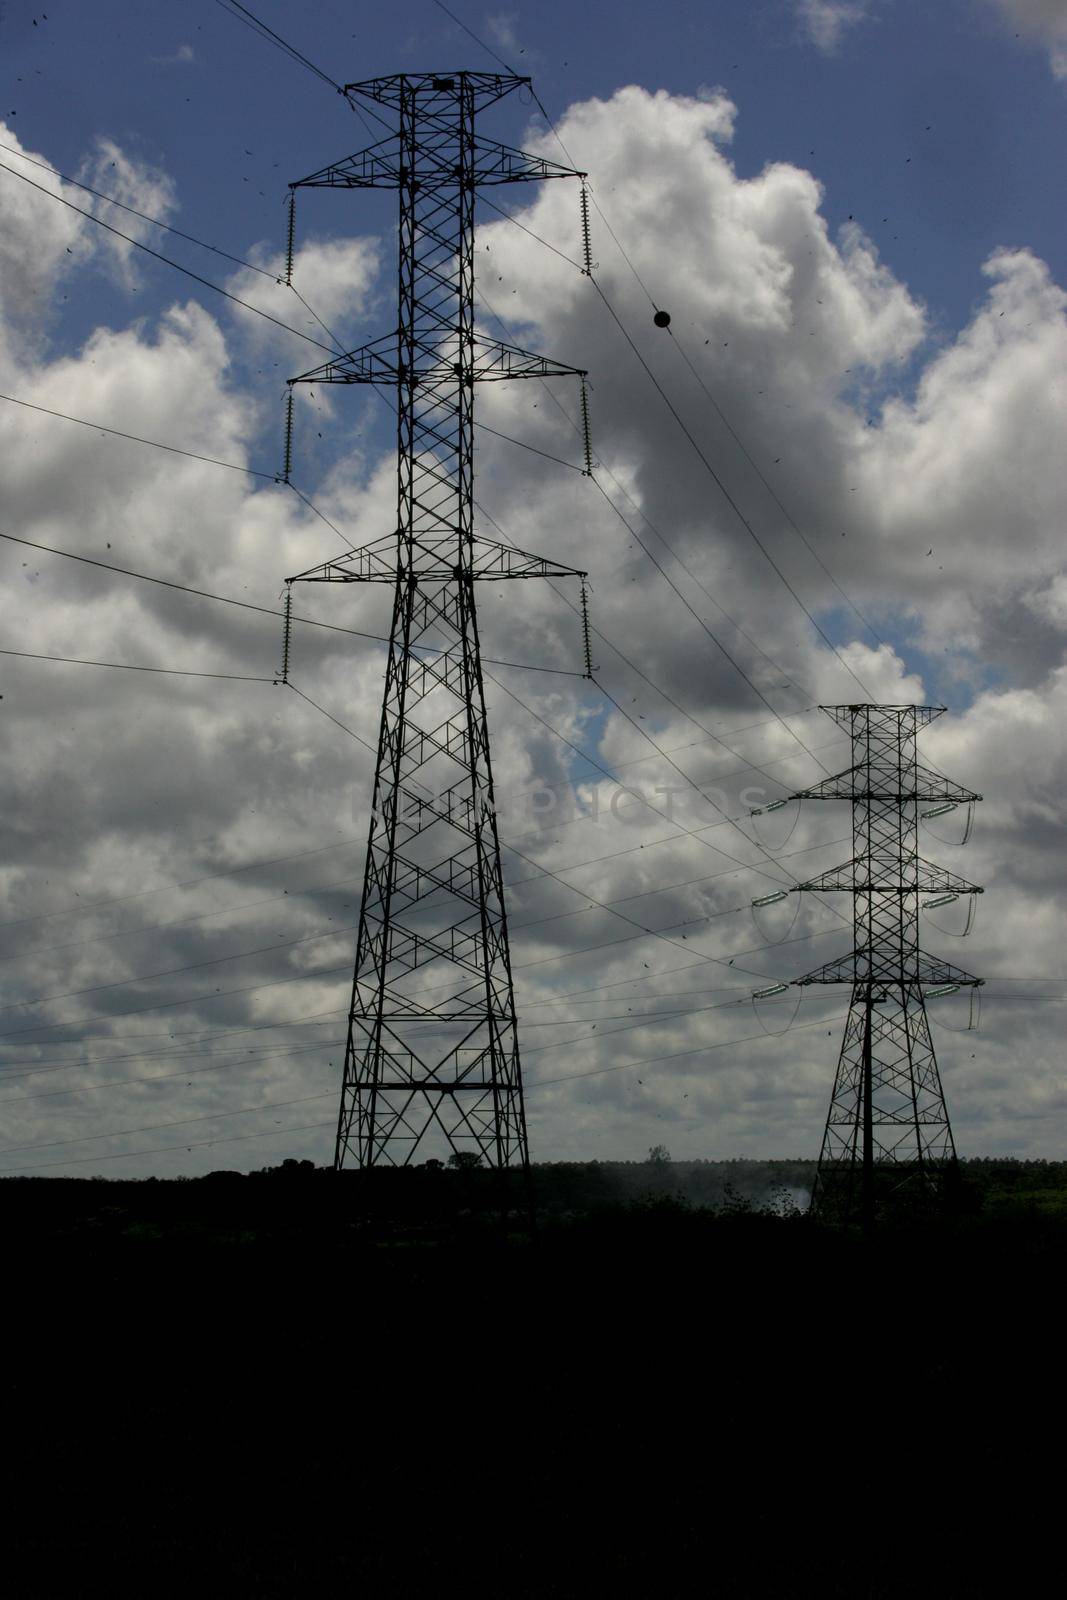 eunapolis, bahia / brazil - march 29, 2011: Electric power transmission tower is seen in the city of eunapolis.